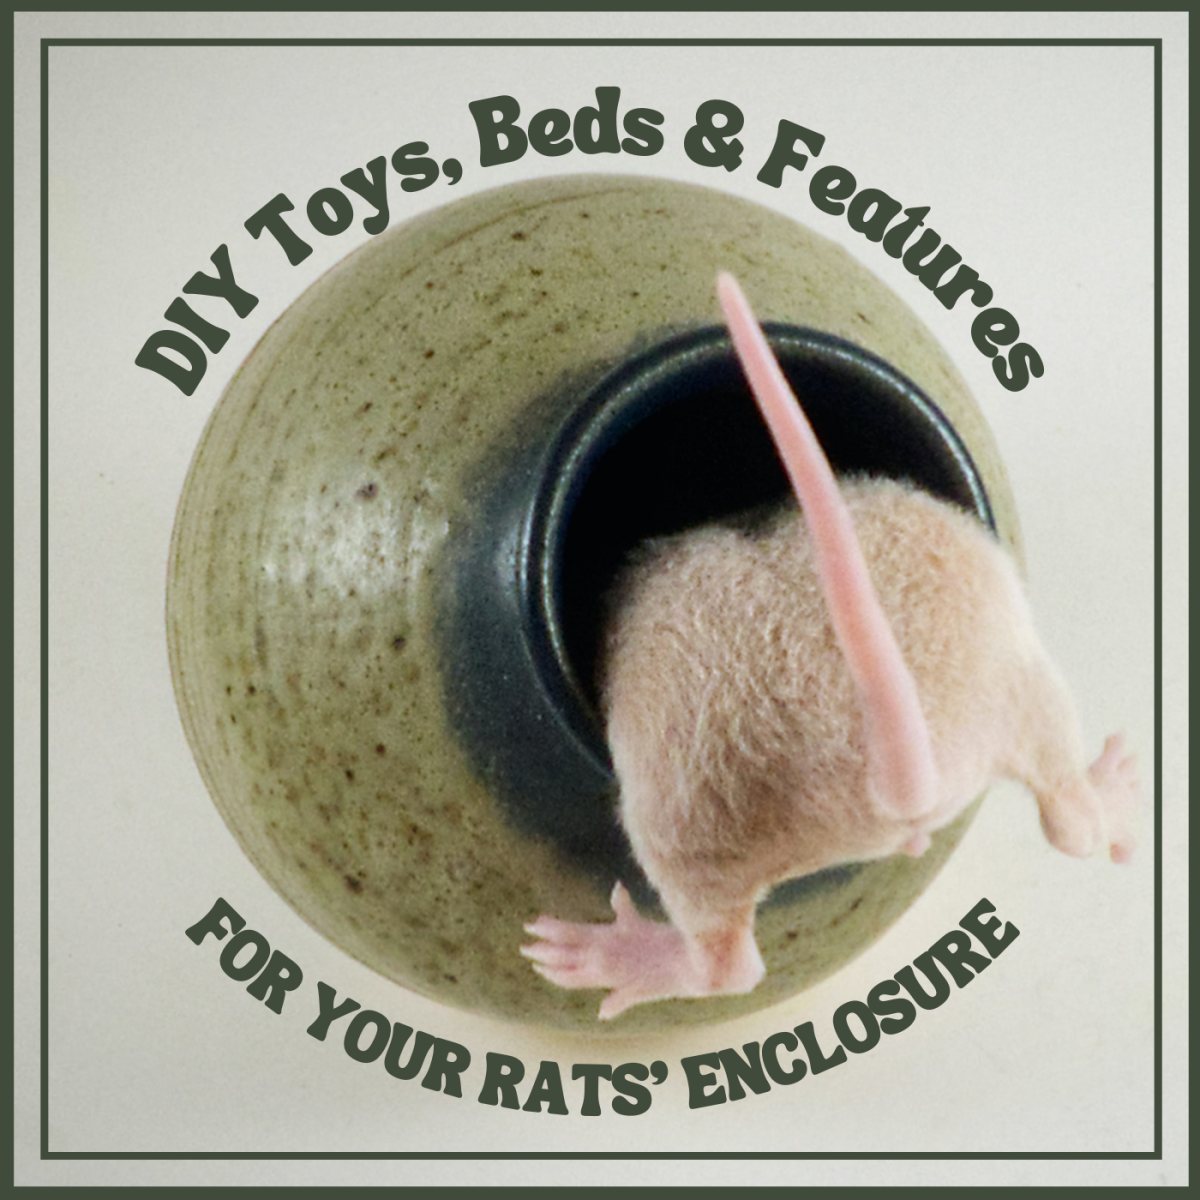 How to Create DIY Toys and Features for Your Rats’ Enclosure